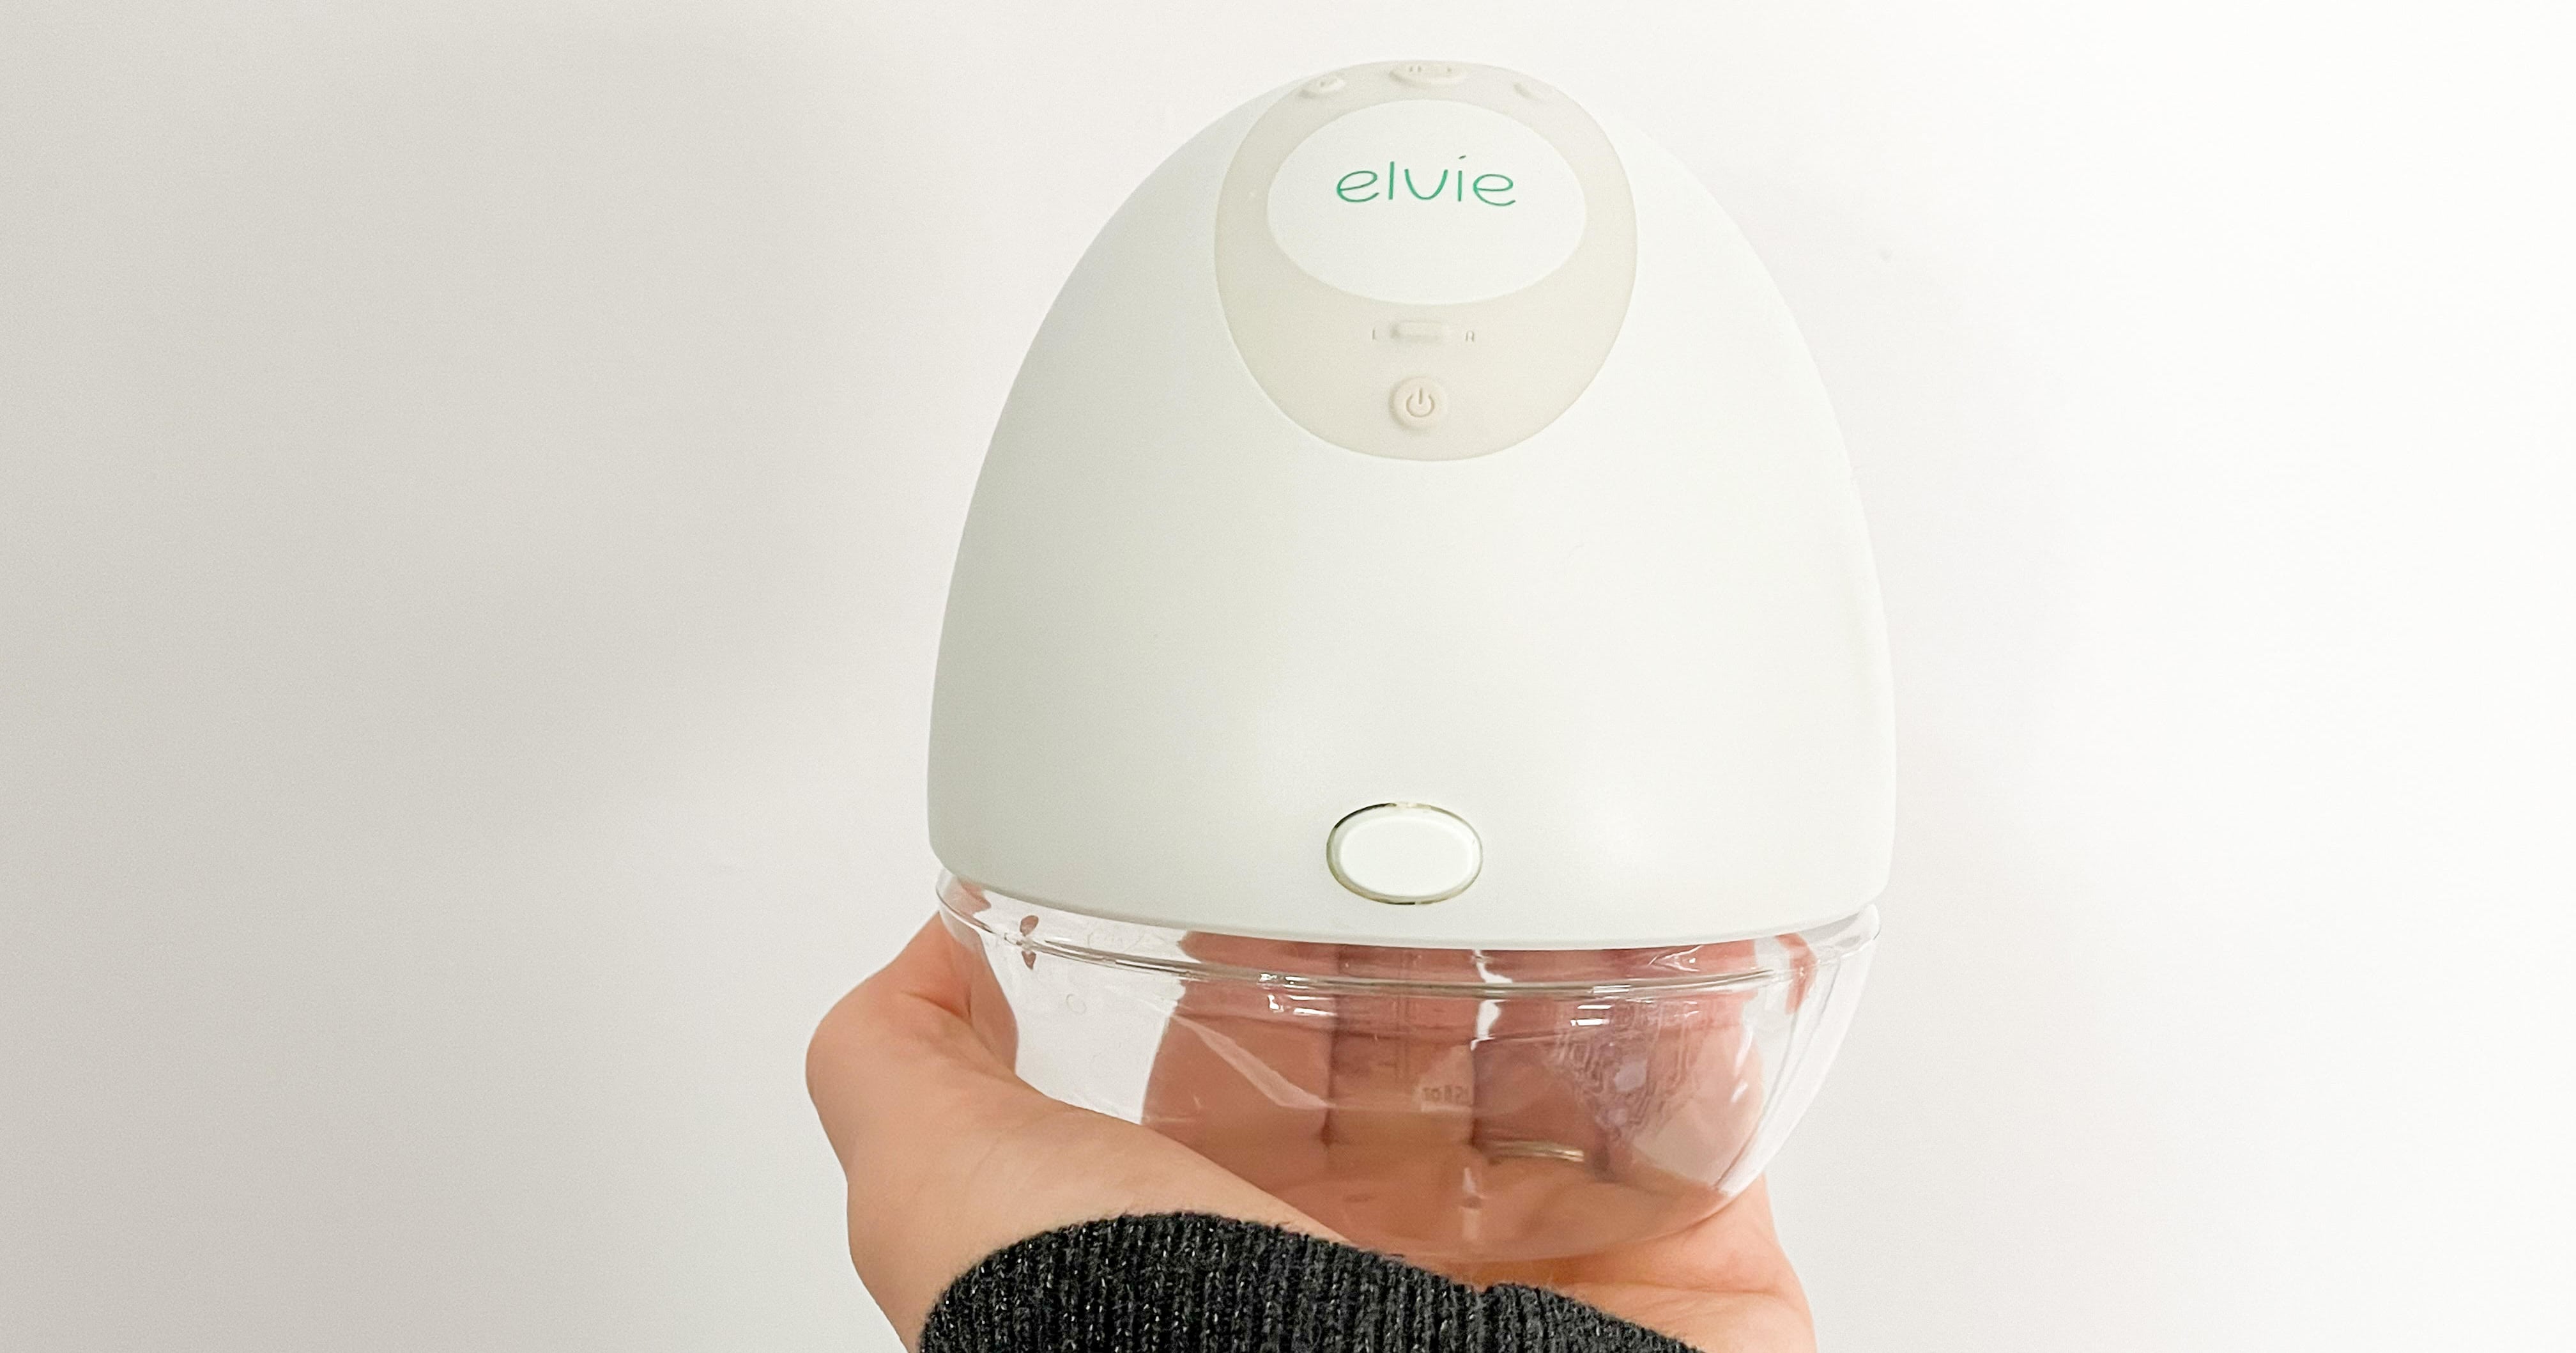 The Elvie breast pump is a good product that you might not need right now